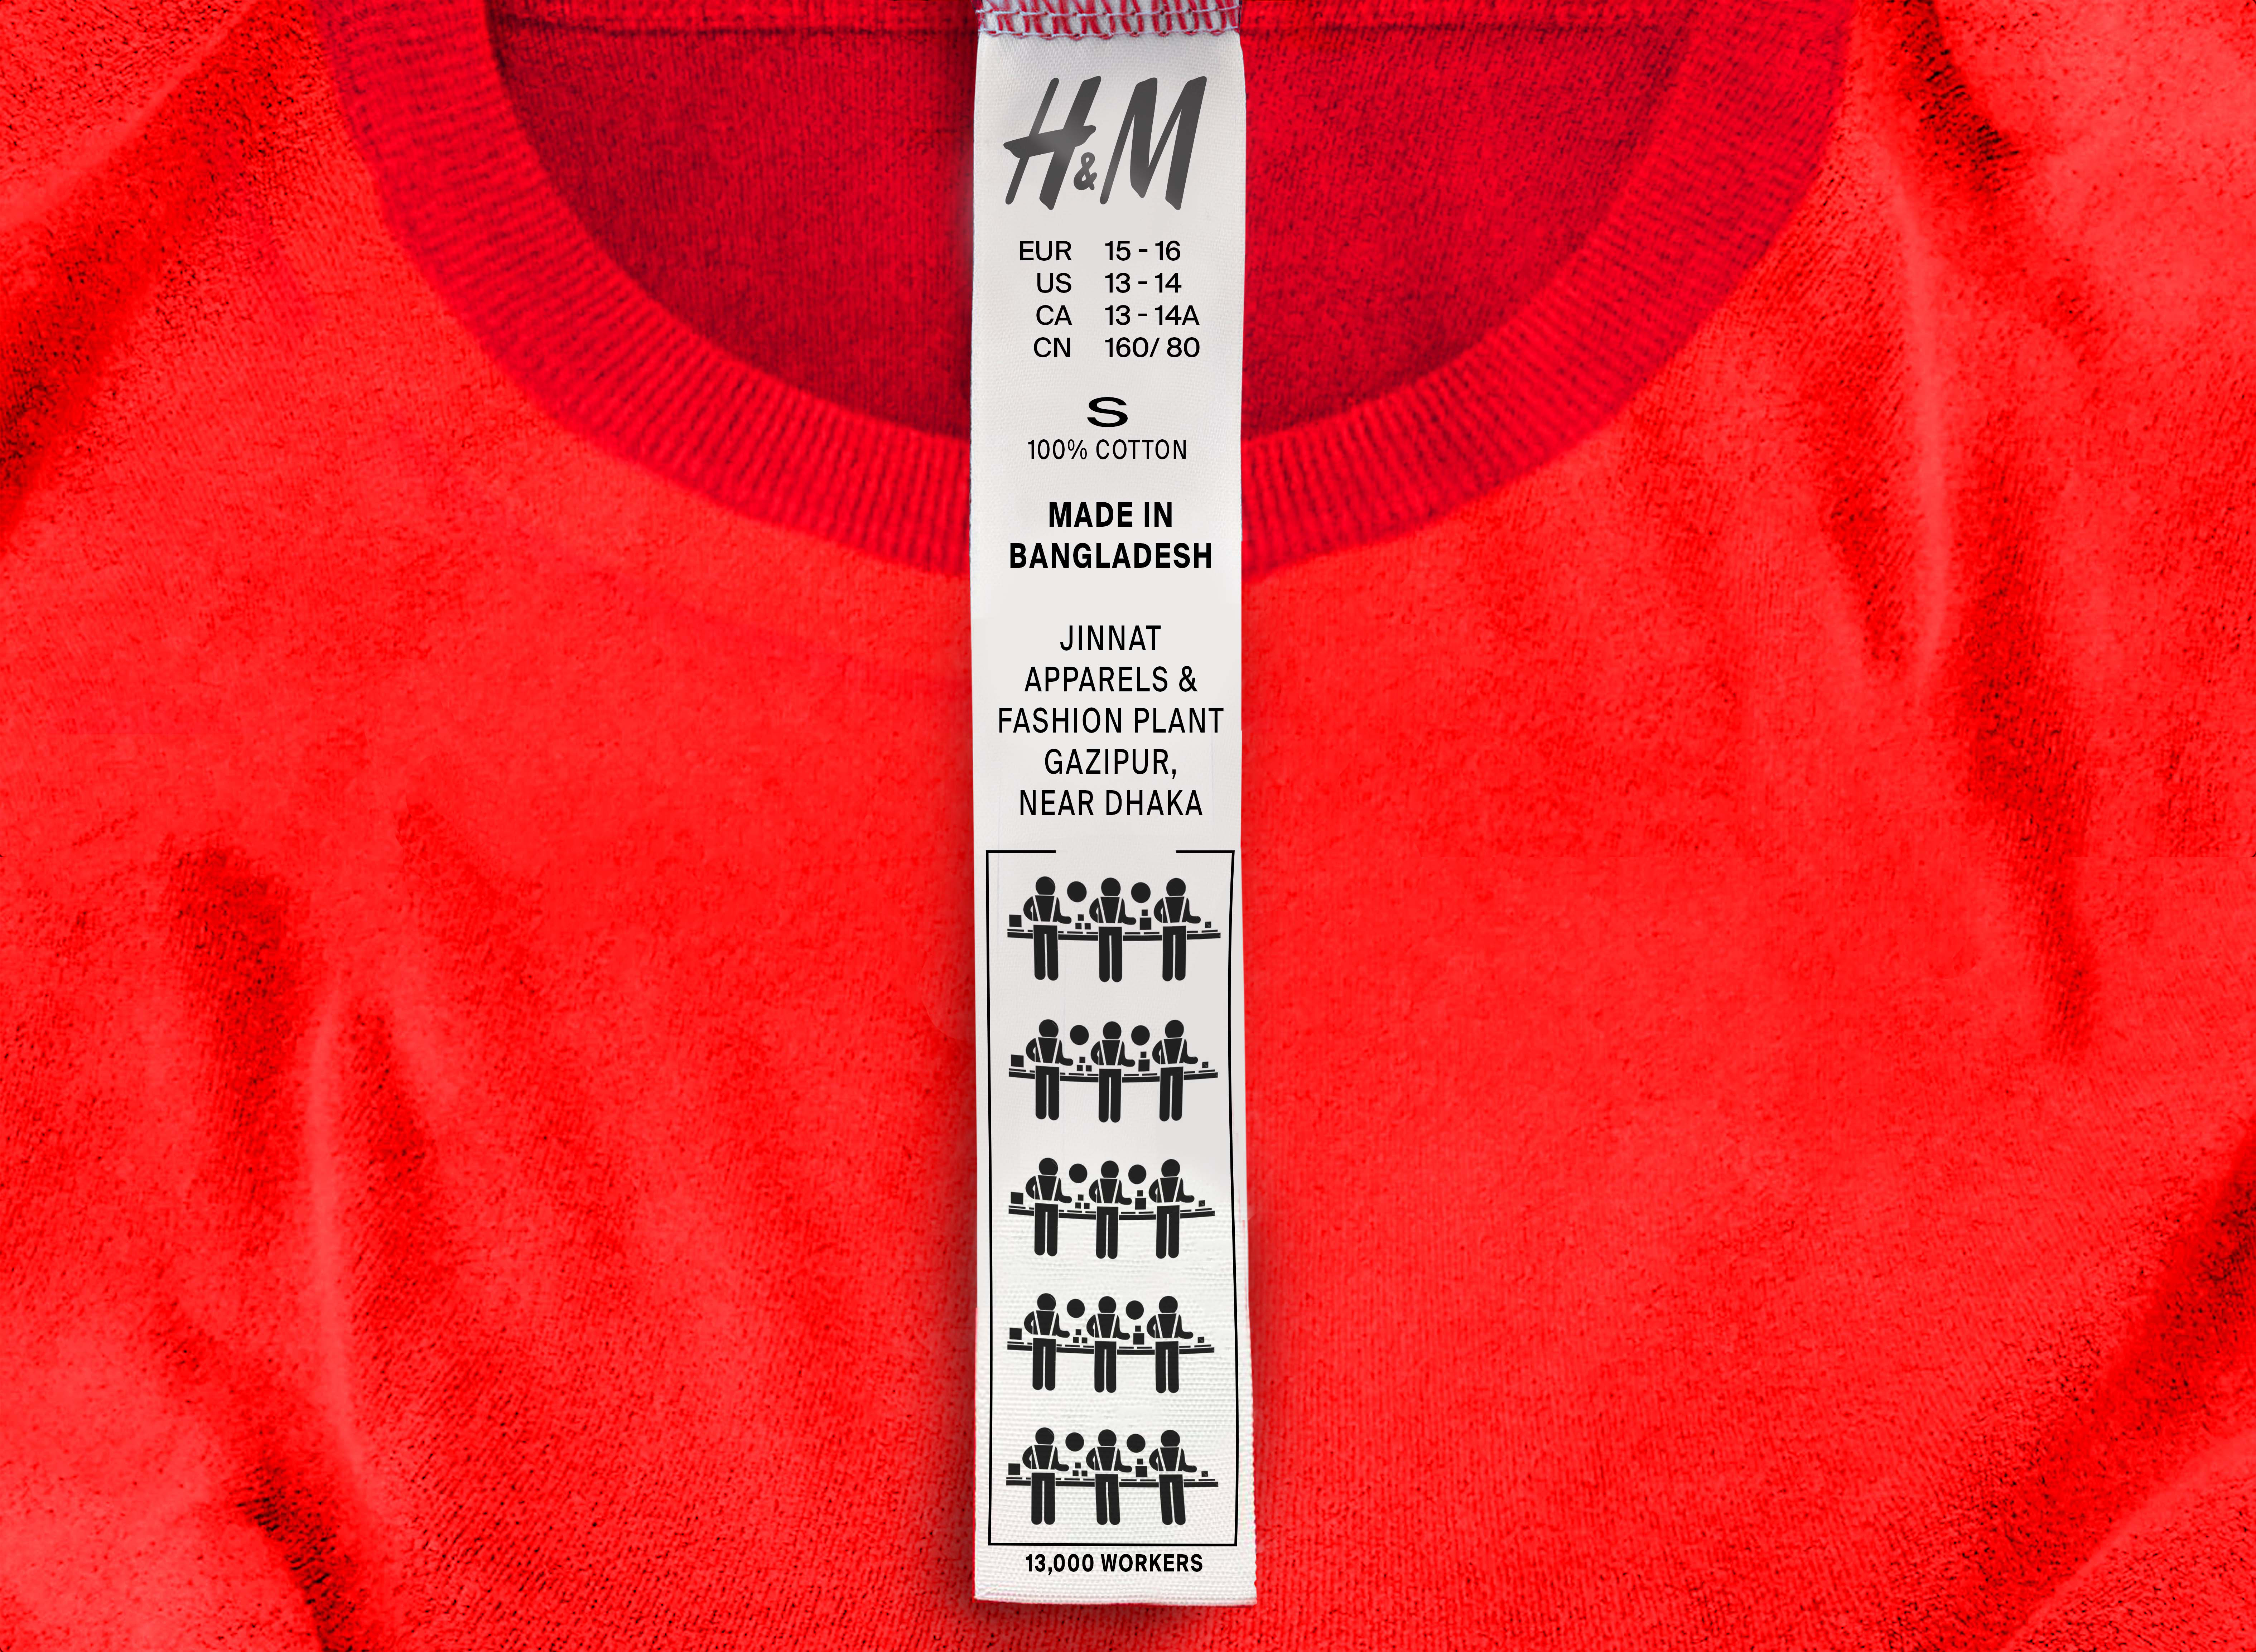 revised H&M label speaking to fast fashion's worker exploitation